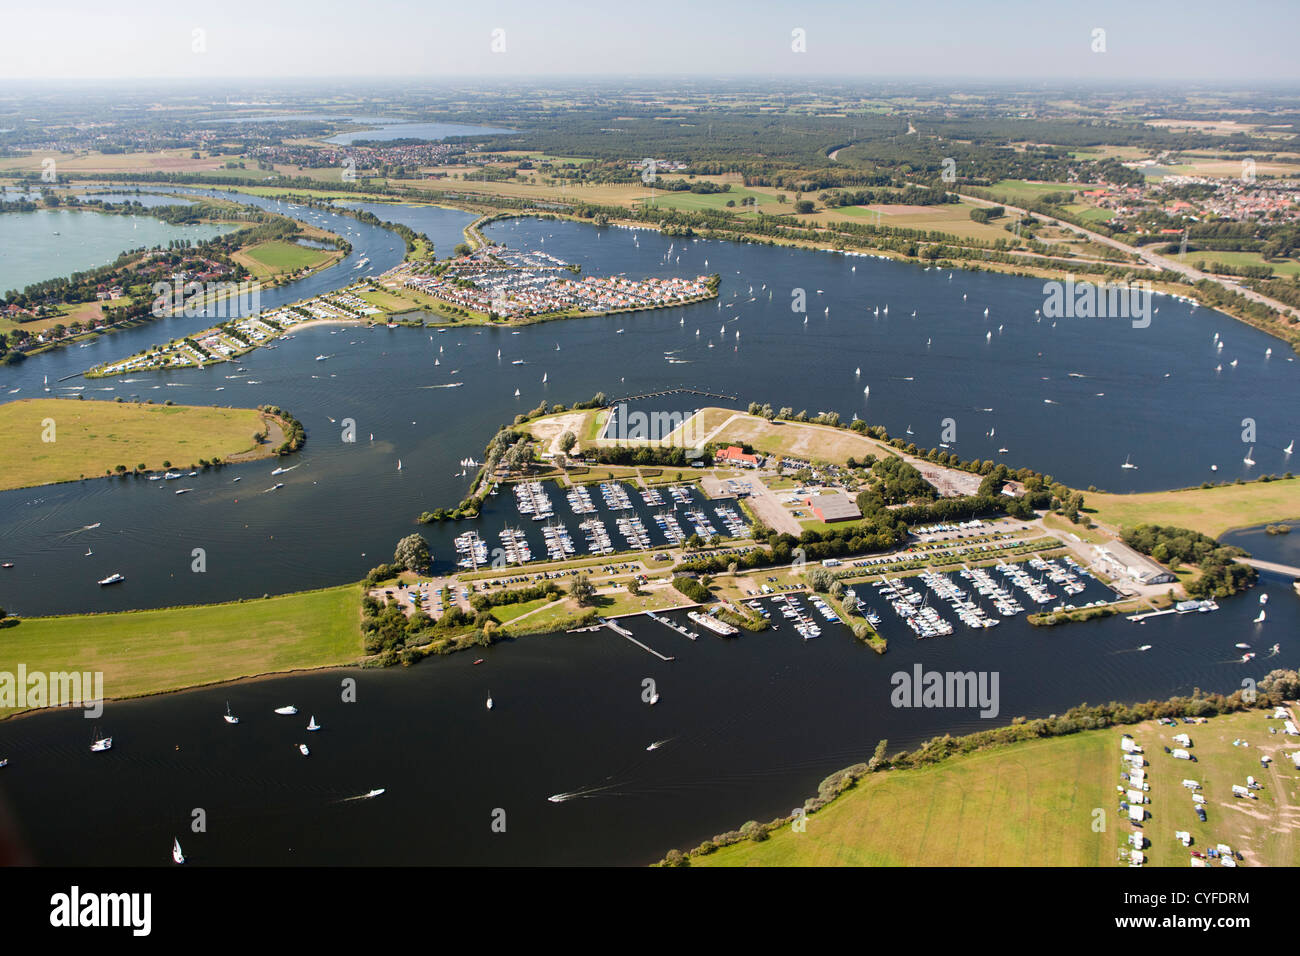 The Netherlands, Maasbracht, Holiday houses and yachts in lakes called Maasplassen. Aerial. Stock Photo